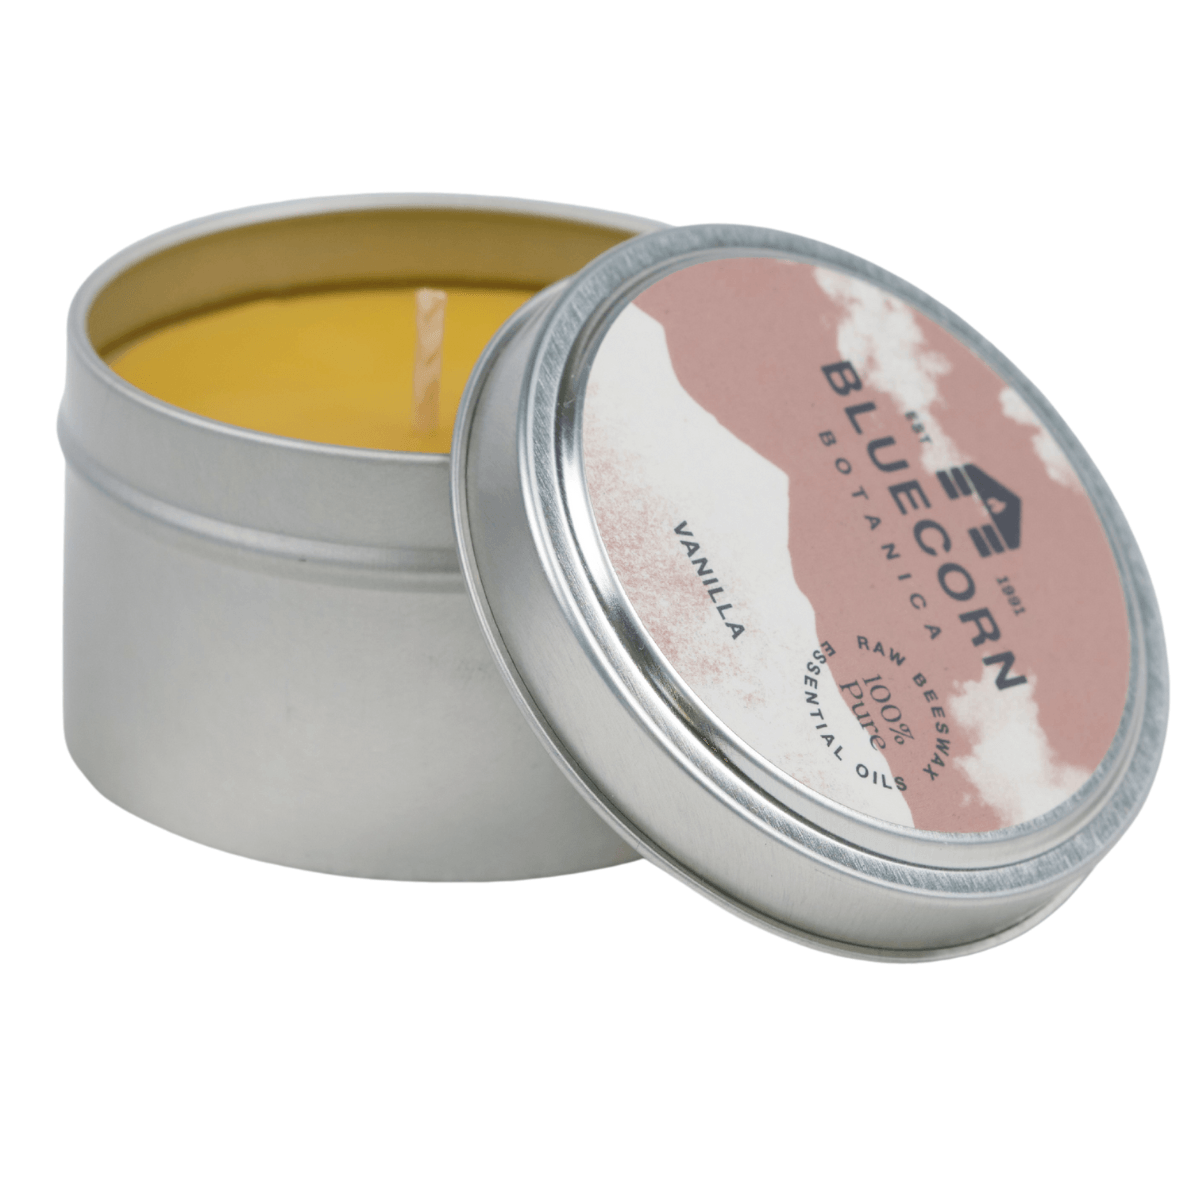 Bluecorn Botanica Vanilla 100% Pure Beeswax Travel Tin Candle. Burn Time: 6oz Candle: 30 Hours. 2oz Candle 12 Hours. Made with 100% Pure Beeswax and 100% Pure Essential Oils. Made with 100% pure cotton wick, no lead and paraffin free. Clean burning and non-toxic. Features Bluecorn Botanica Label in recyclable aluminum tin. Perfect for travel, camping and gifts. 